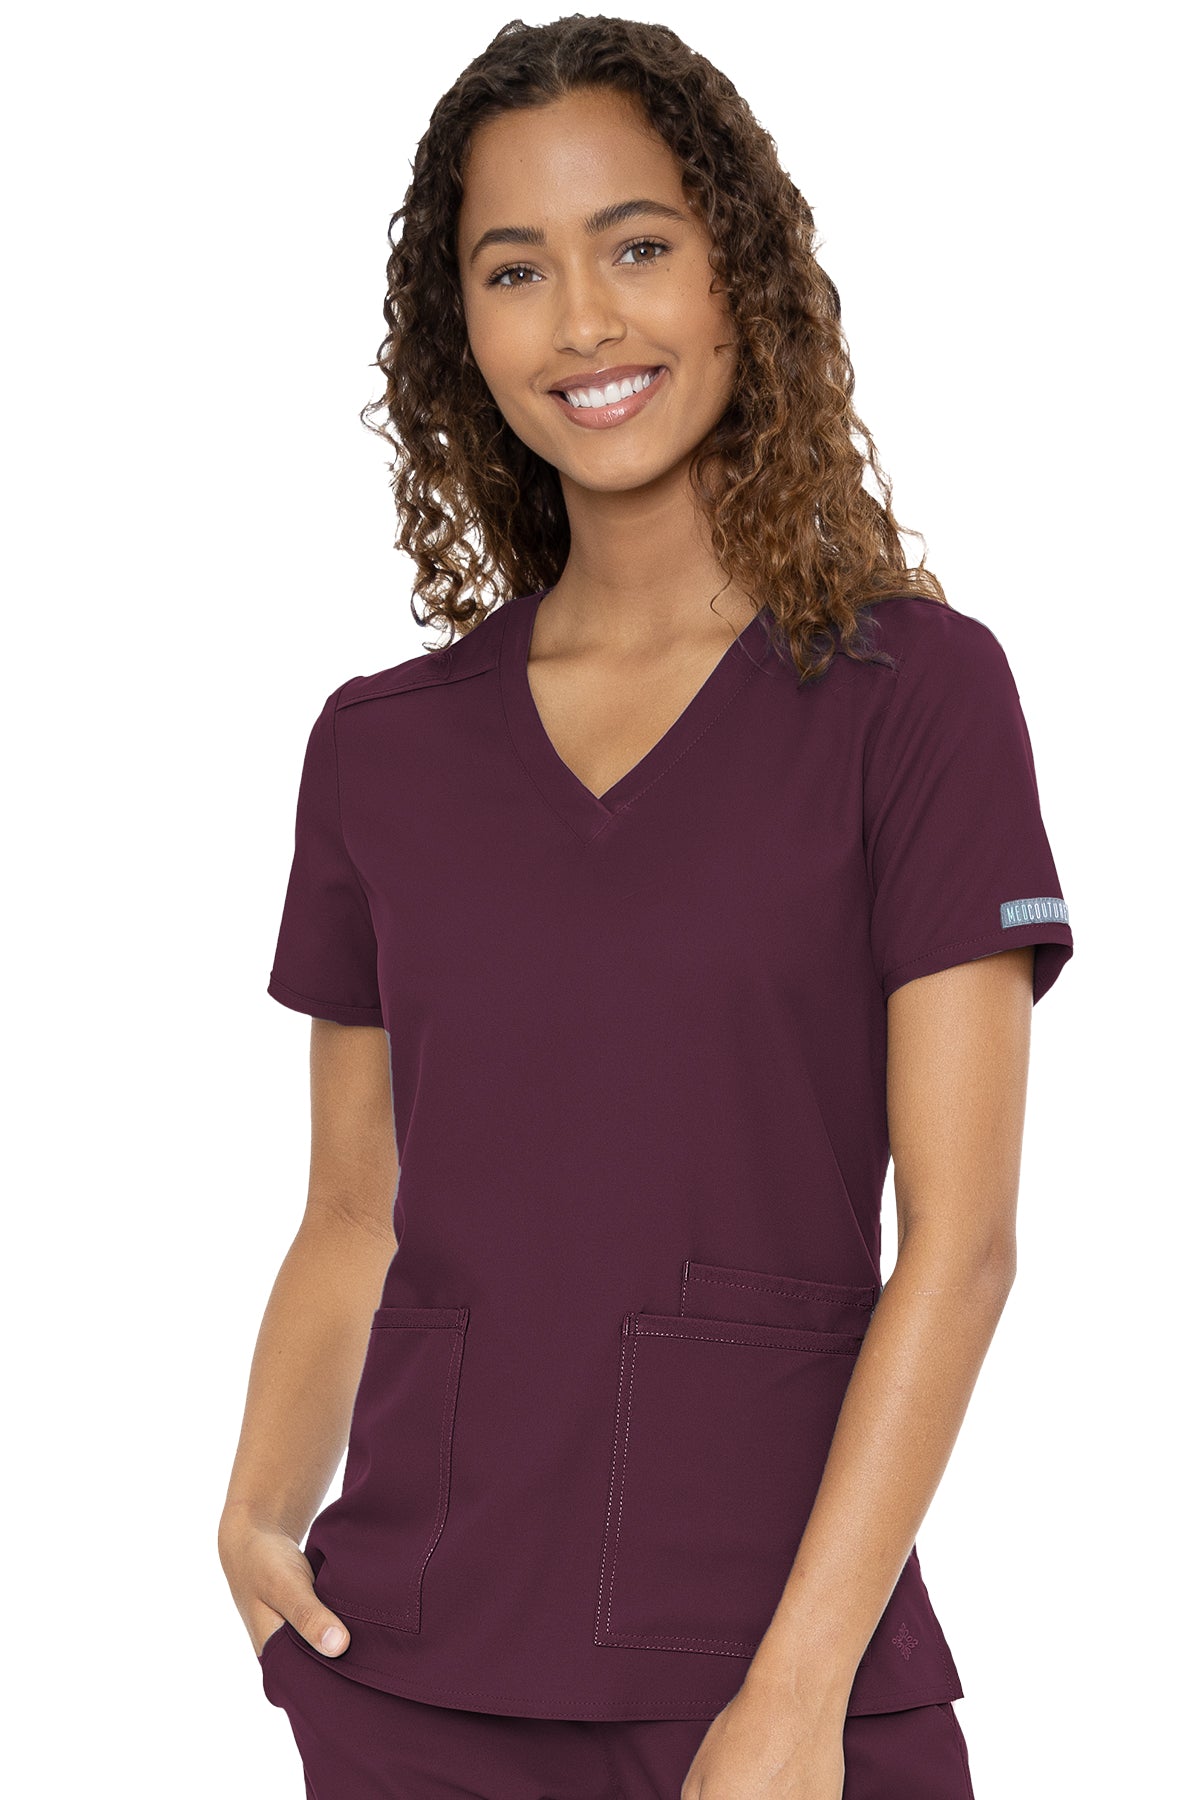 Med Couture Scrub Top Insight Classic V-Neck 3 Pocket in Wine at Parker's Clothing and Shoes.